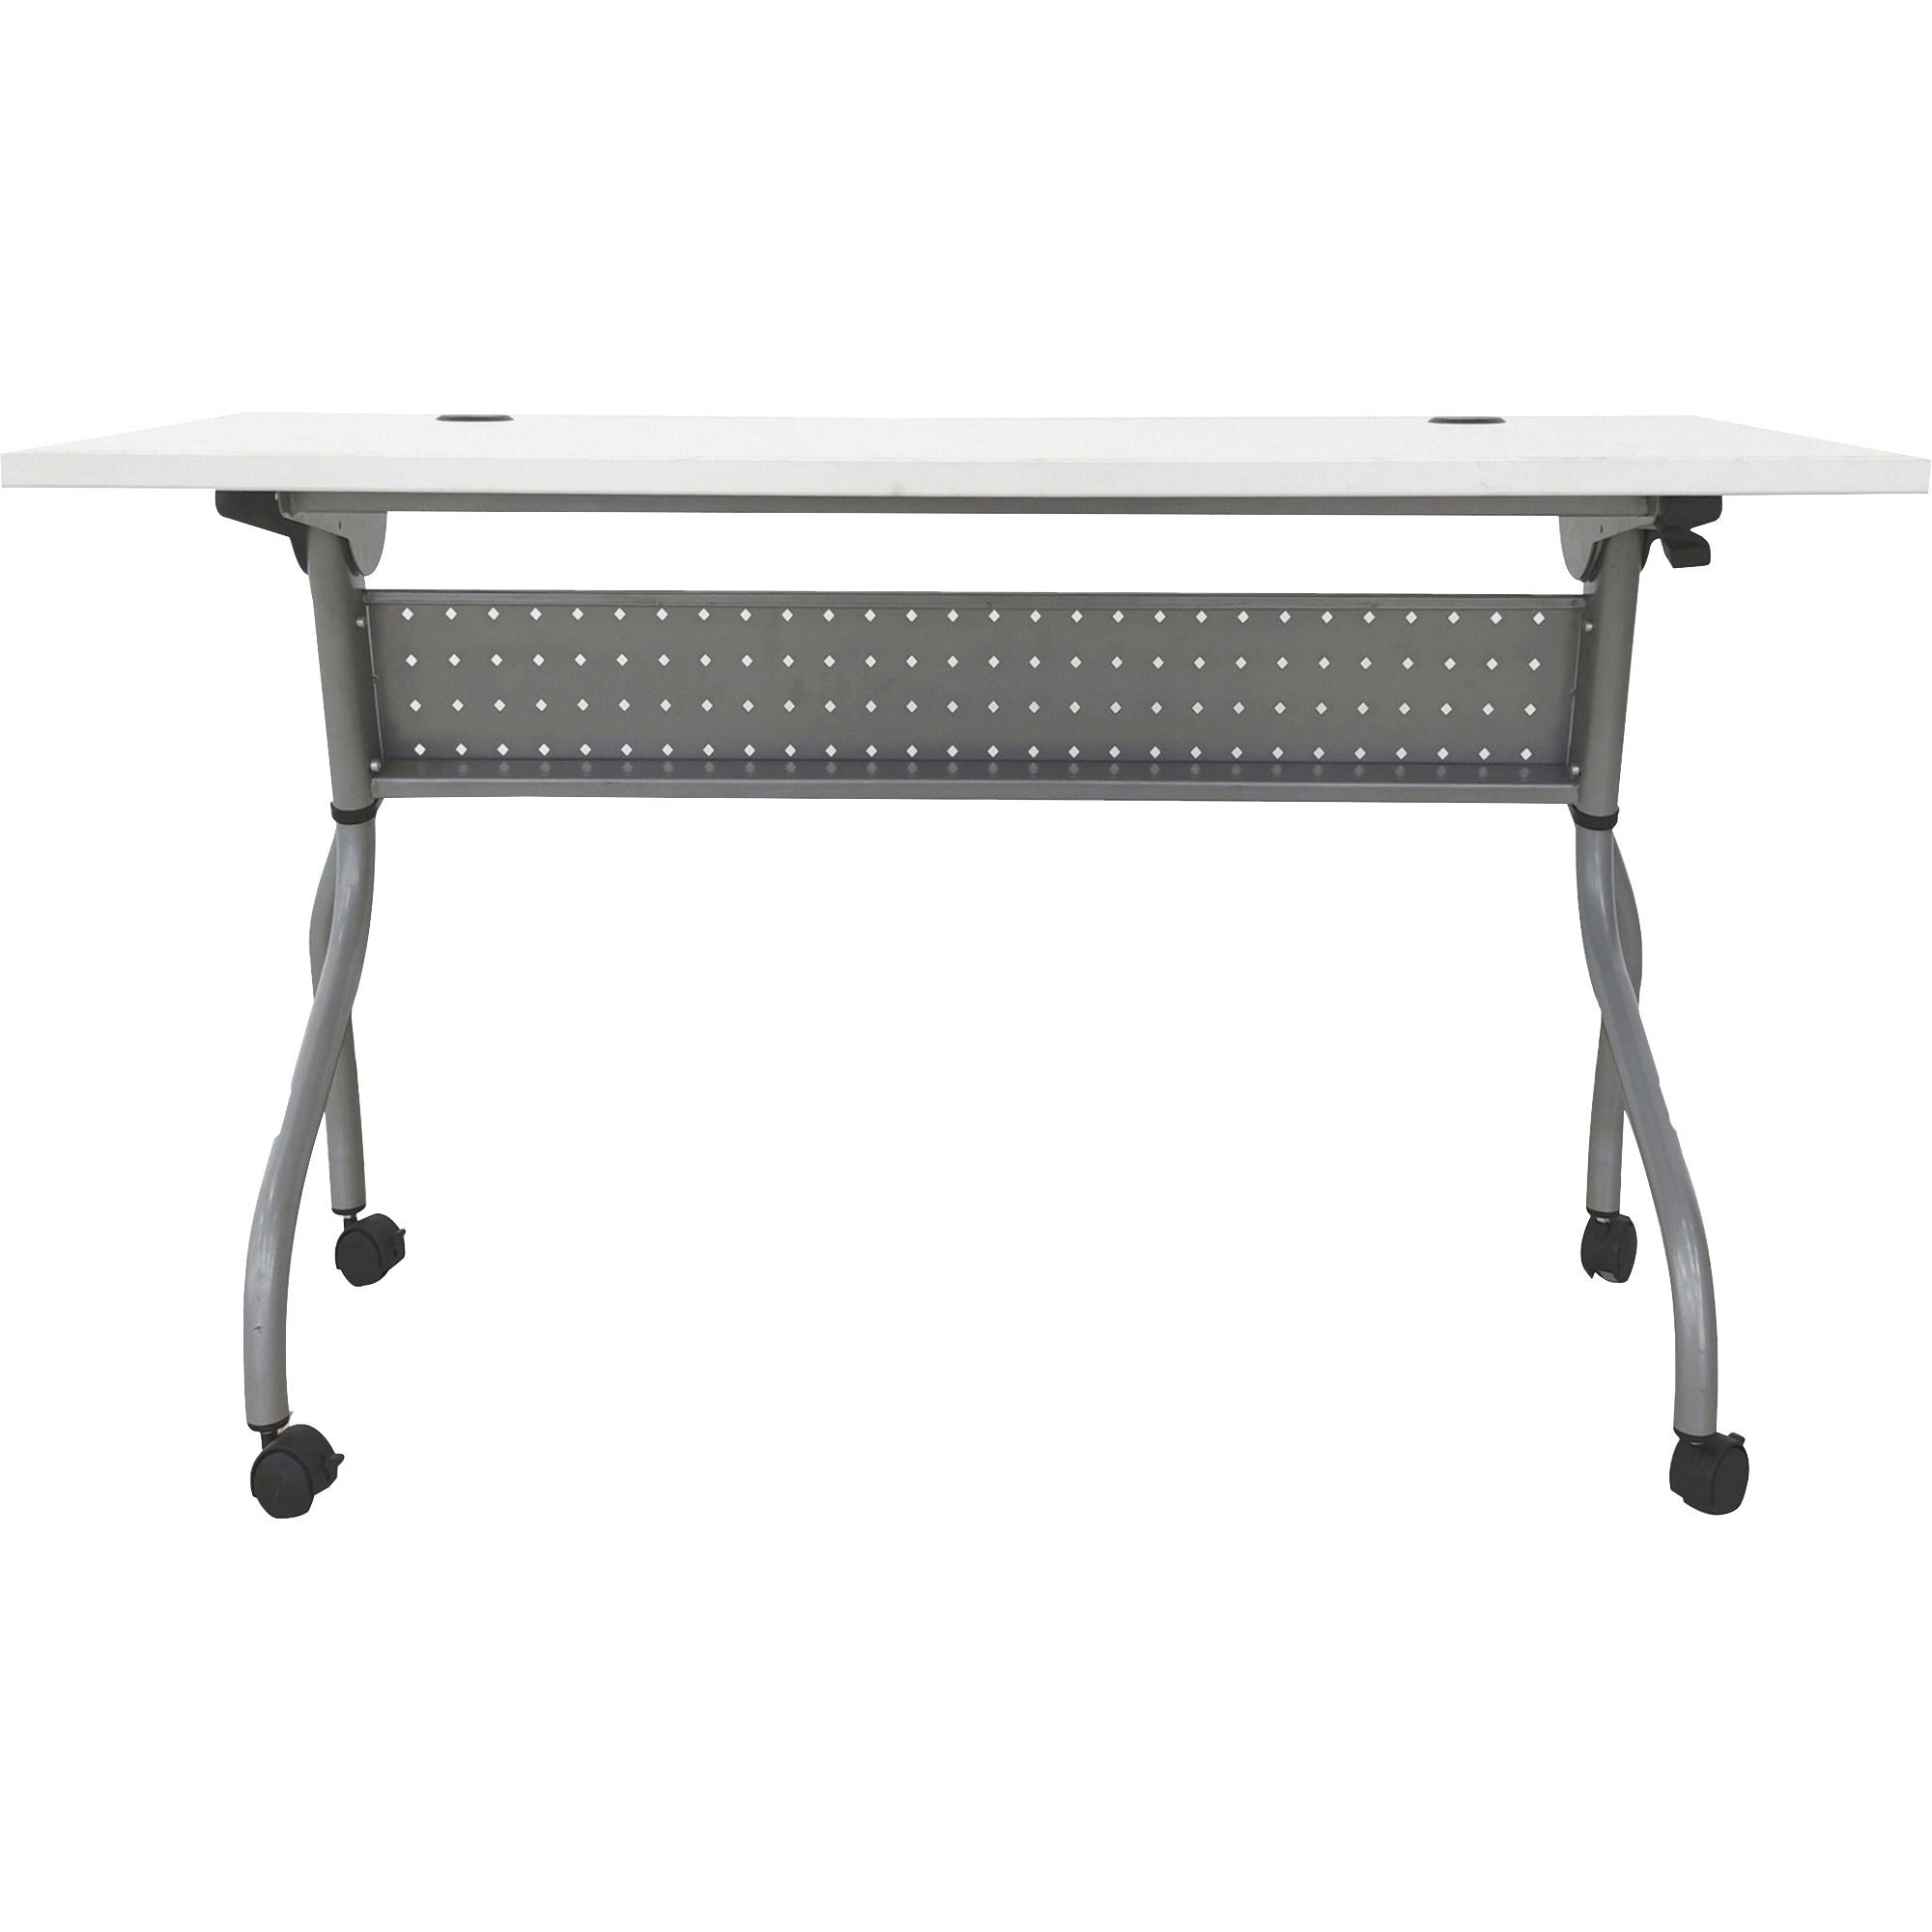 lorell-flip-top-training-table-for-table-topwhite-rectangle-top-silver-folding-base-4-legs-2360-table-top-length-x-48-table-top-width-2950-height-assembly-required-1-each_llr60745 - 3